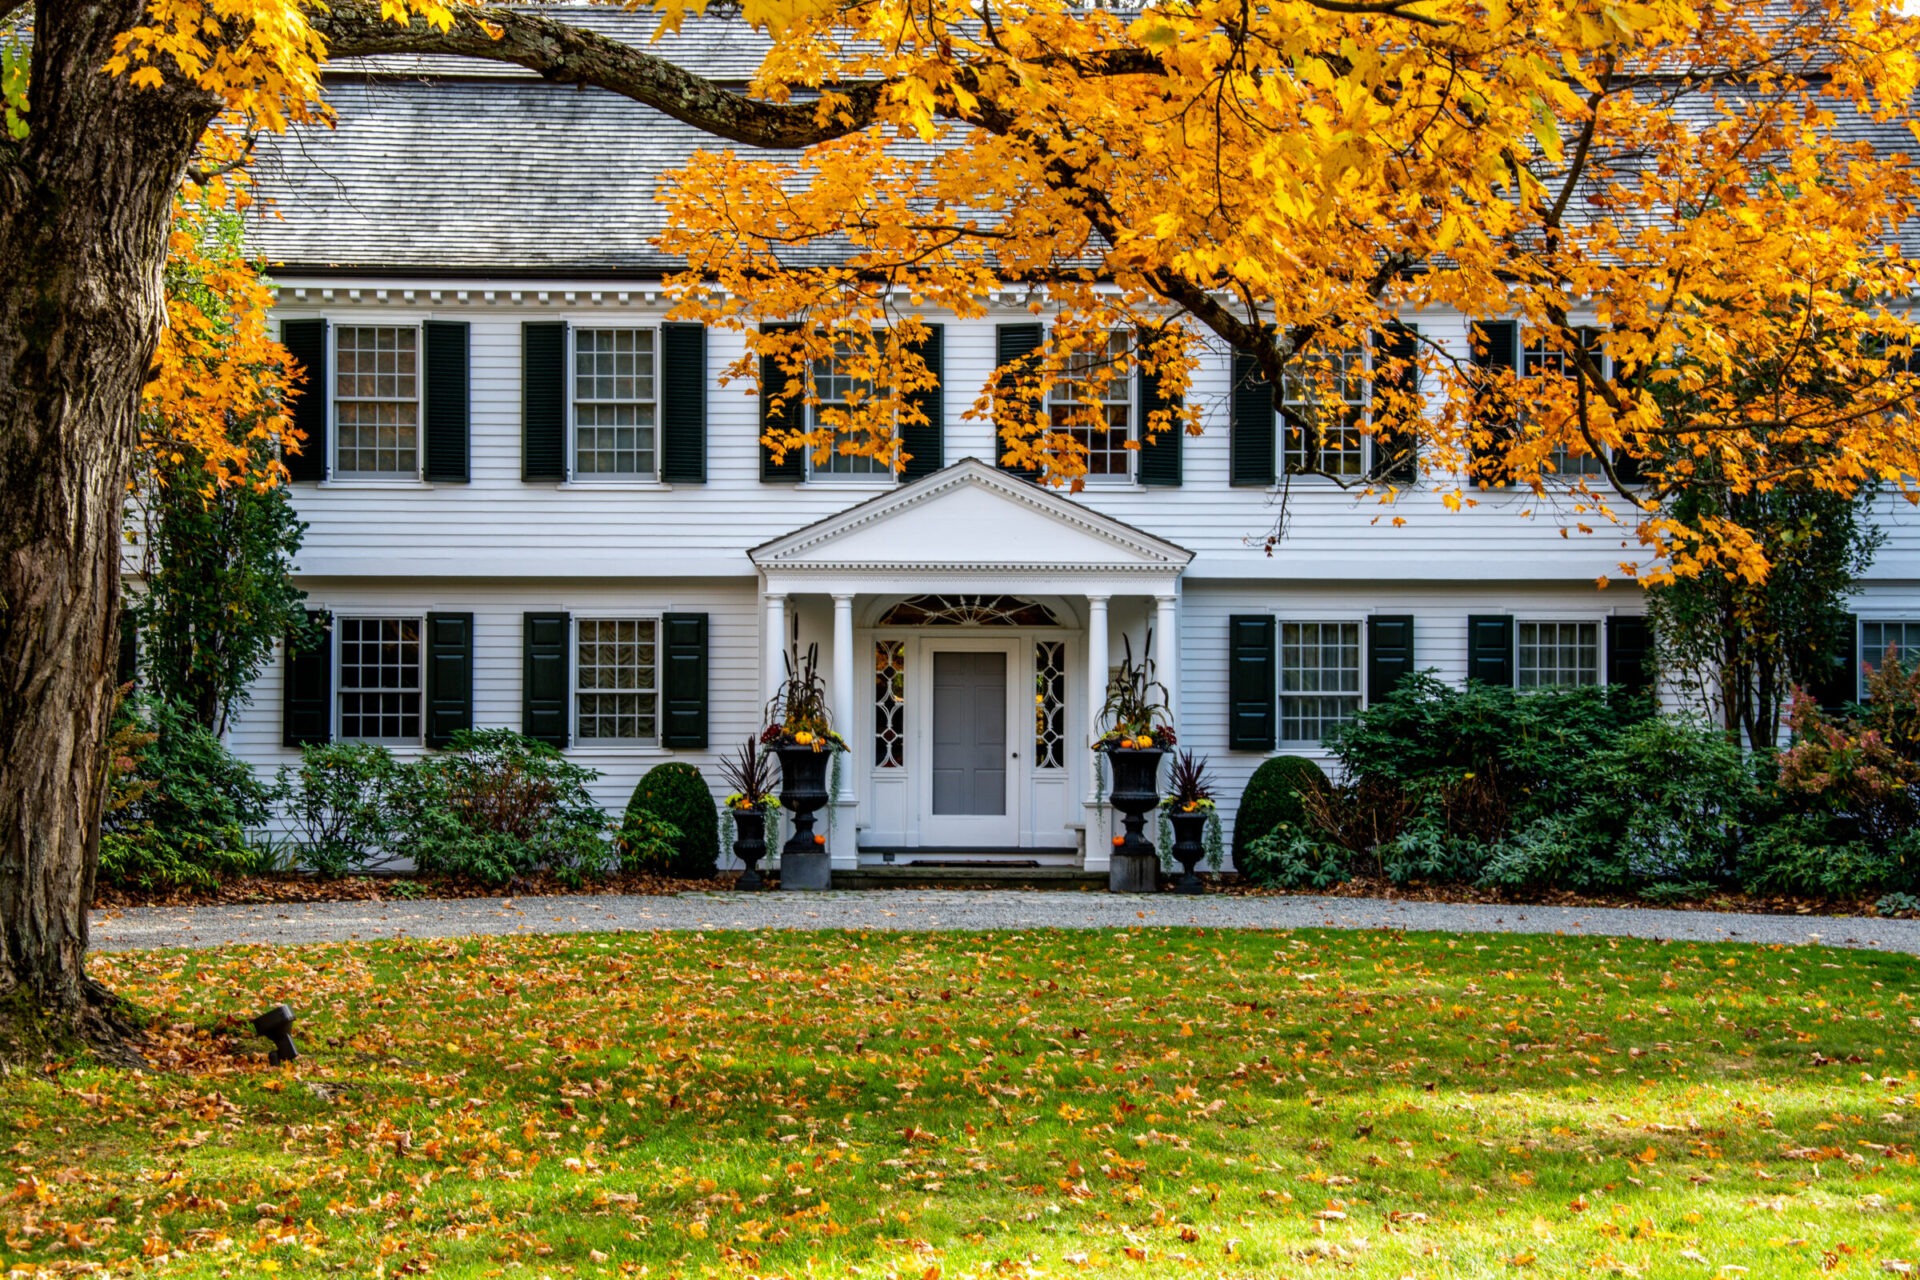 A classic two-story white house with black shutters, autumn leaves, a portico entrance, and decorative planters under a bright fall canopy.